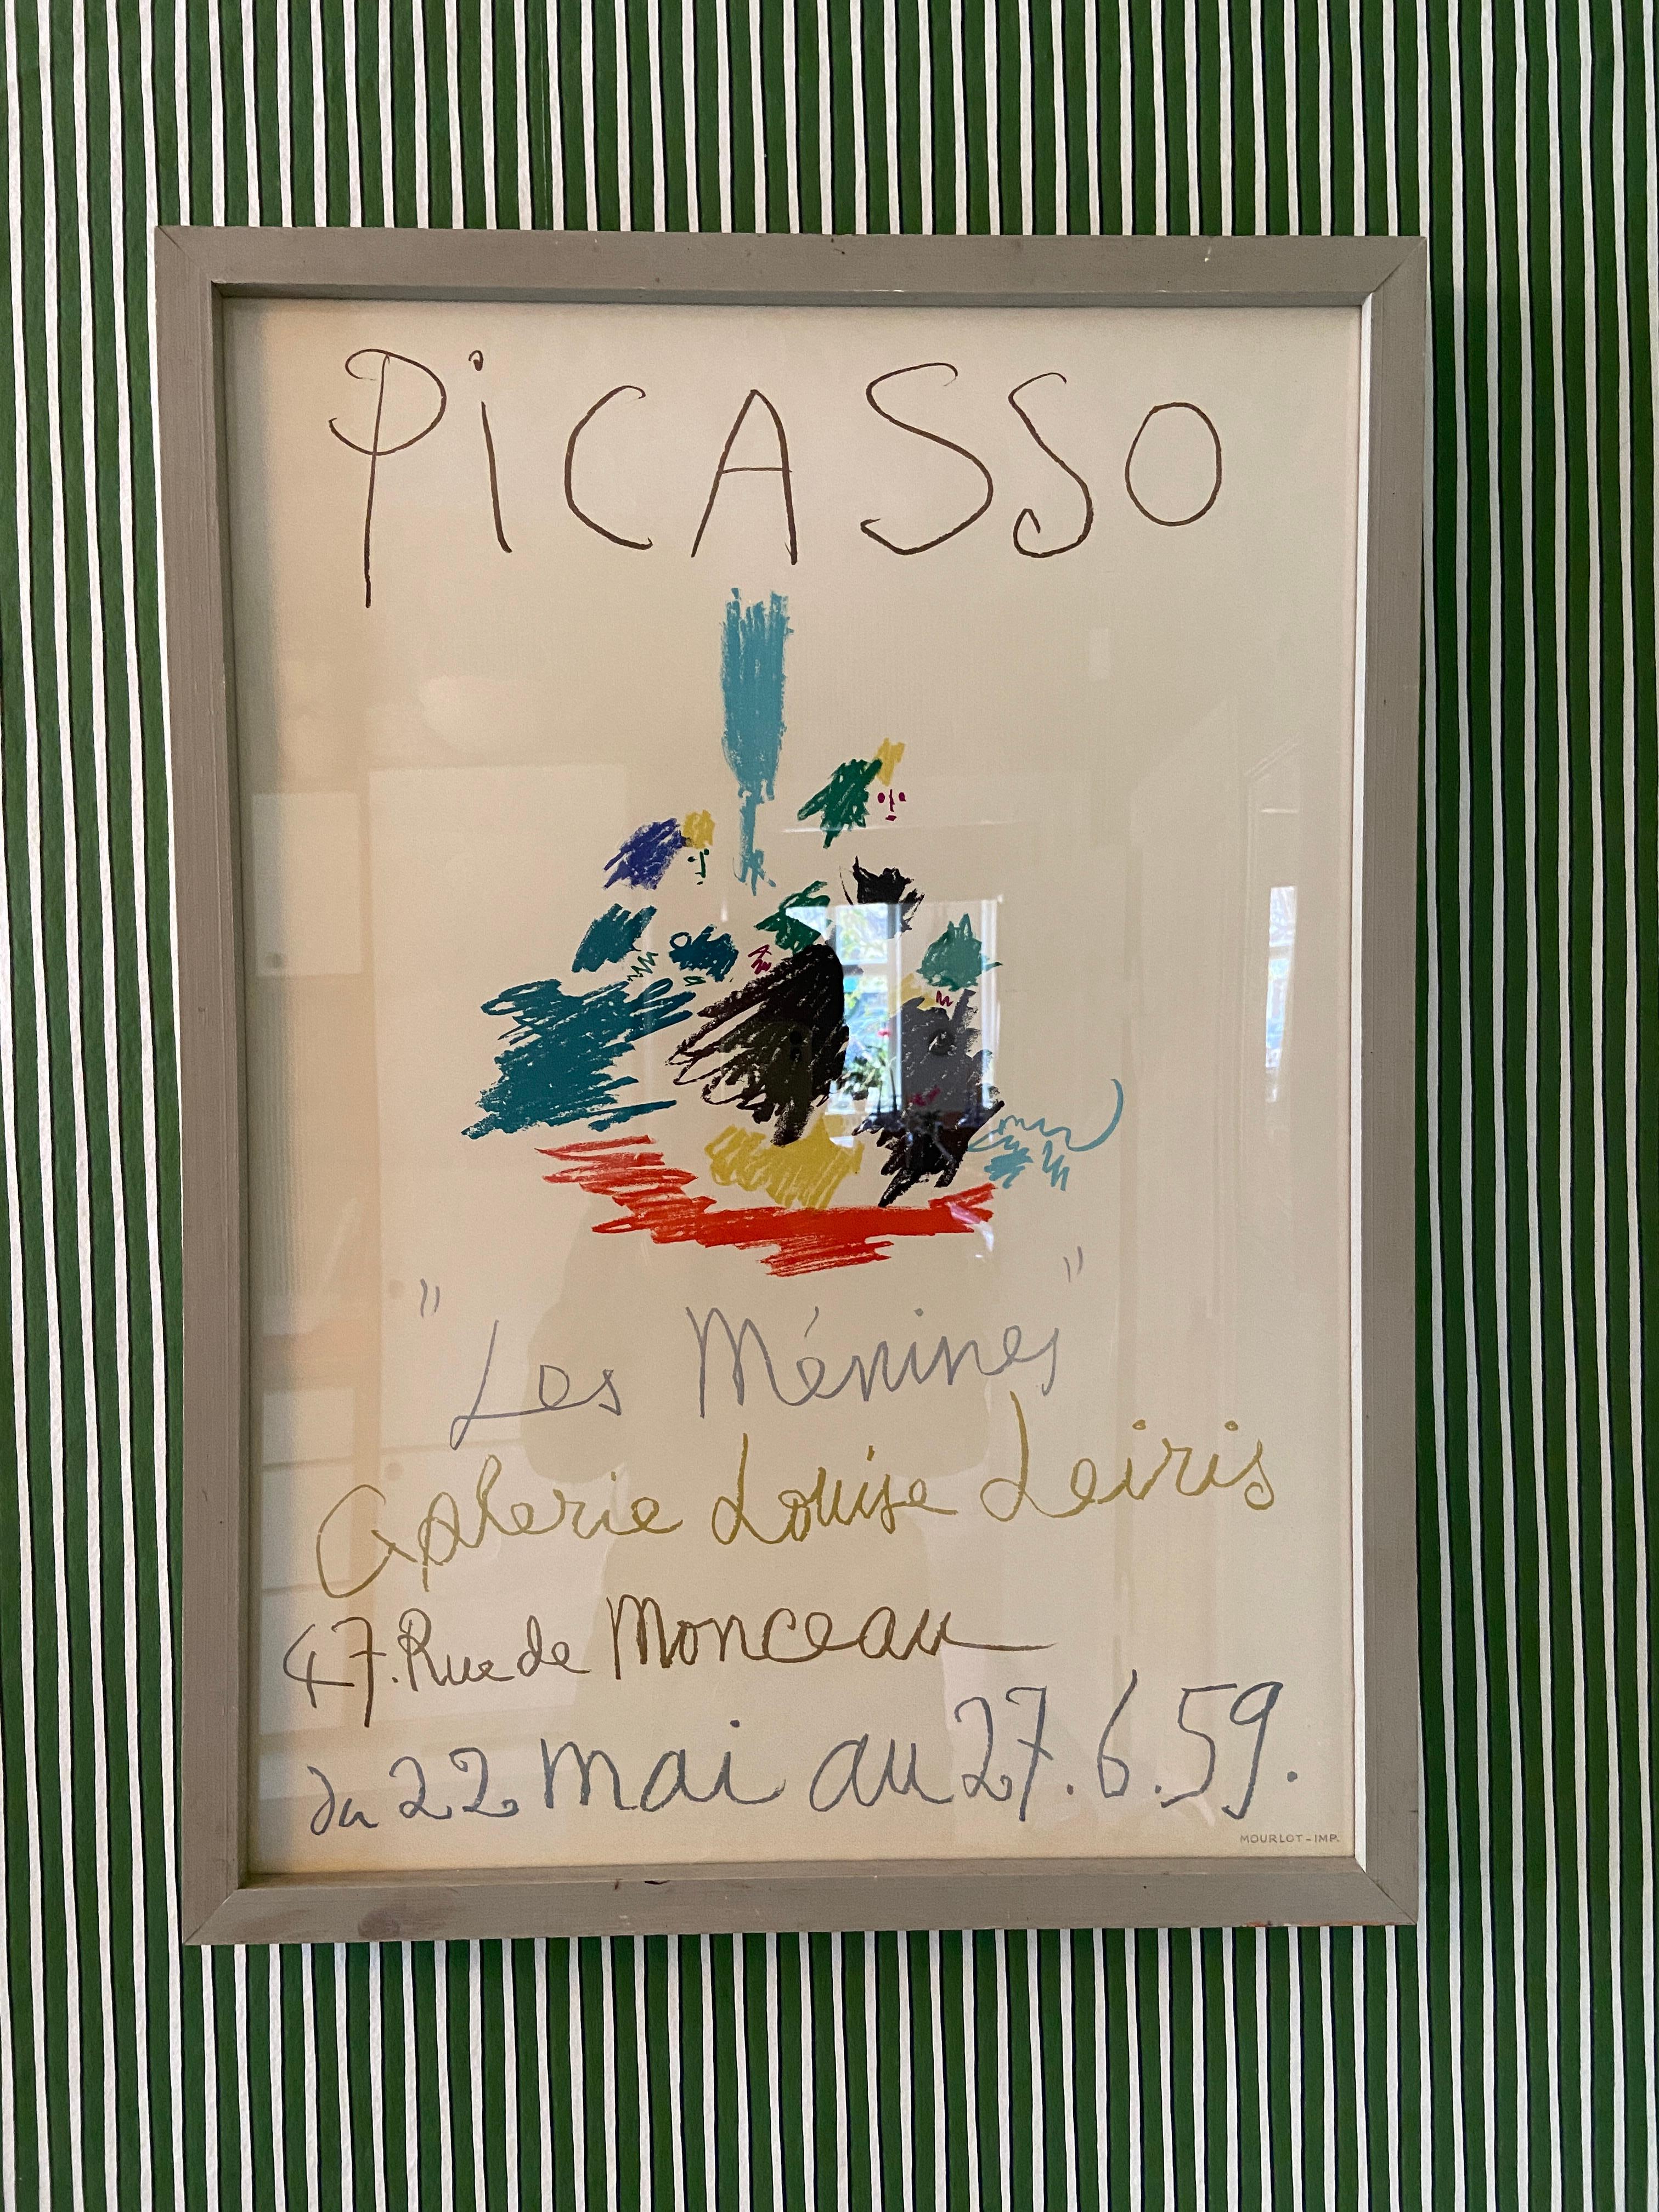 French Vintage Pablo Picasso Exhibition Poster in Grey Wooden Frame, France, 1959